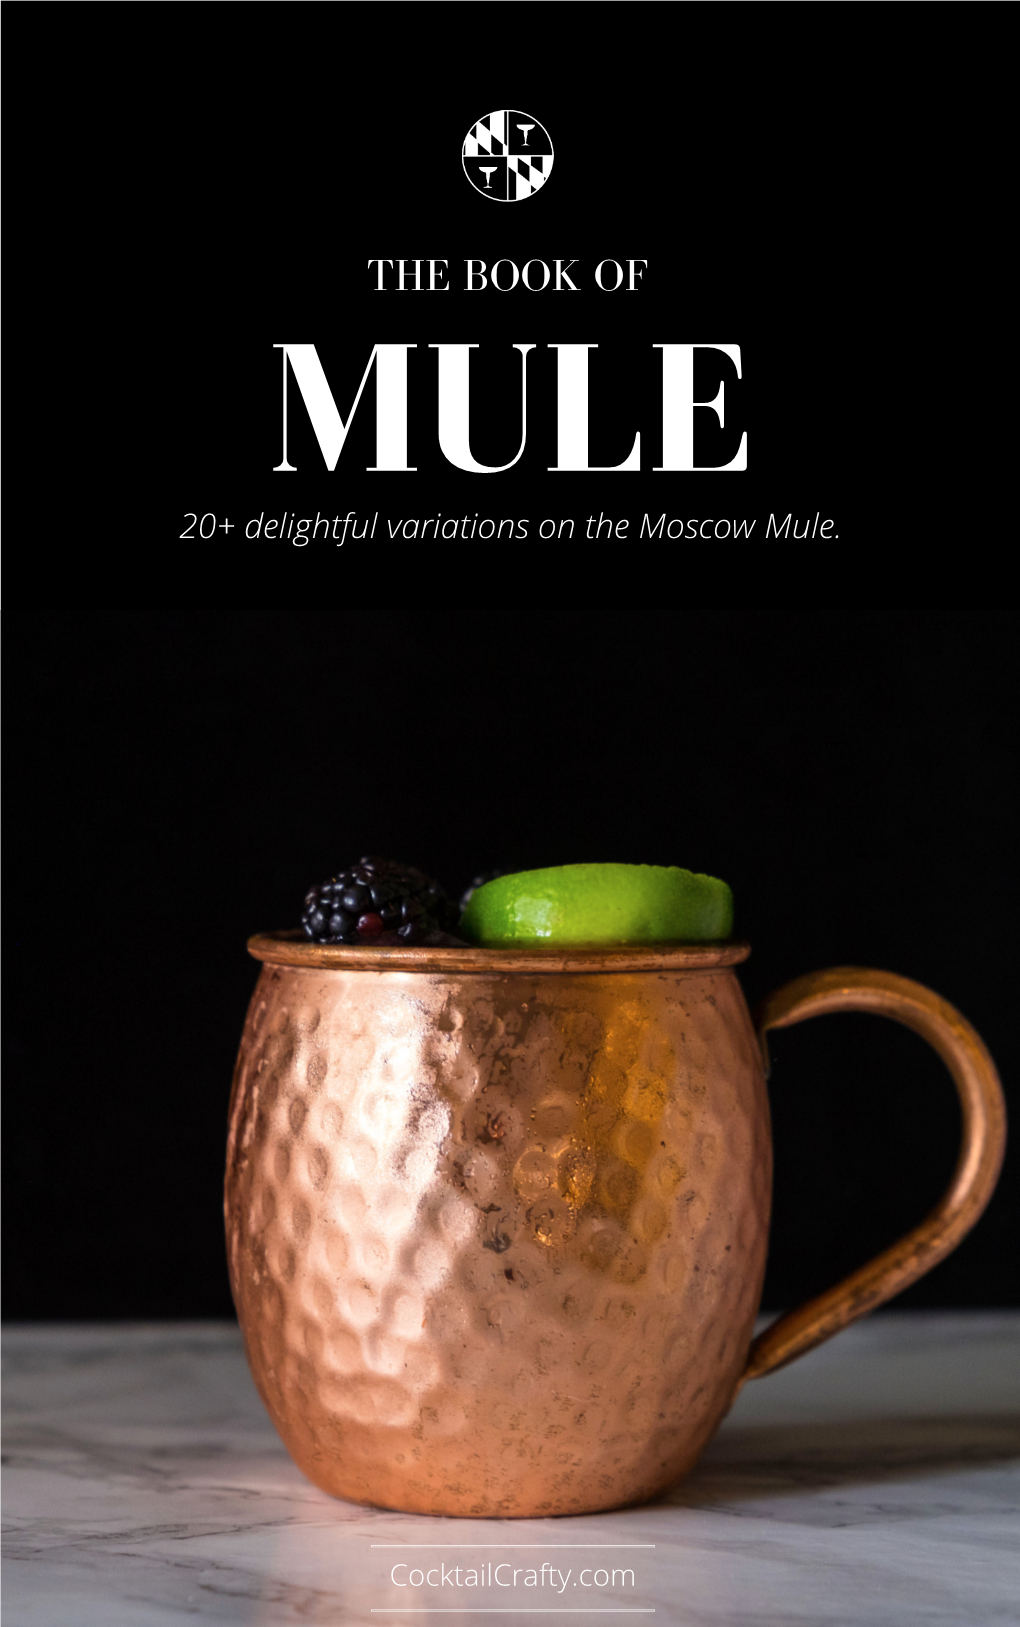 THE BOOK of MULE 20+ Delightful Variations on the Moscow Mule